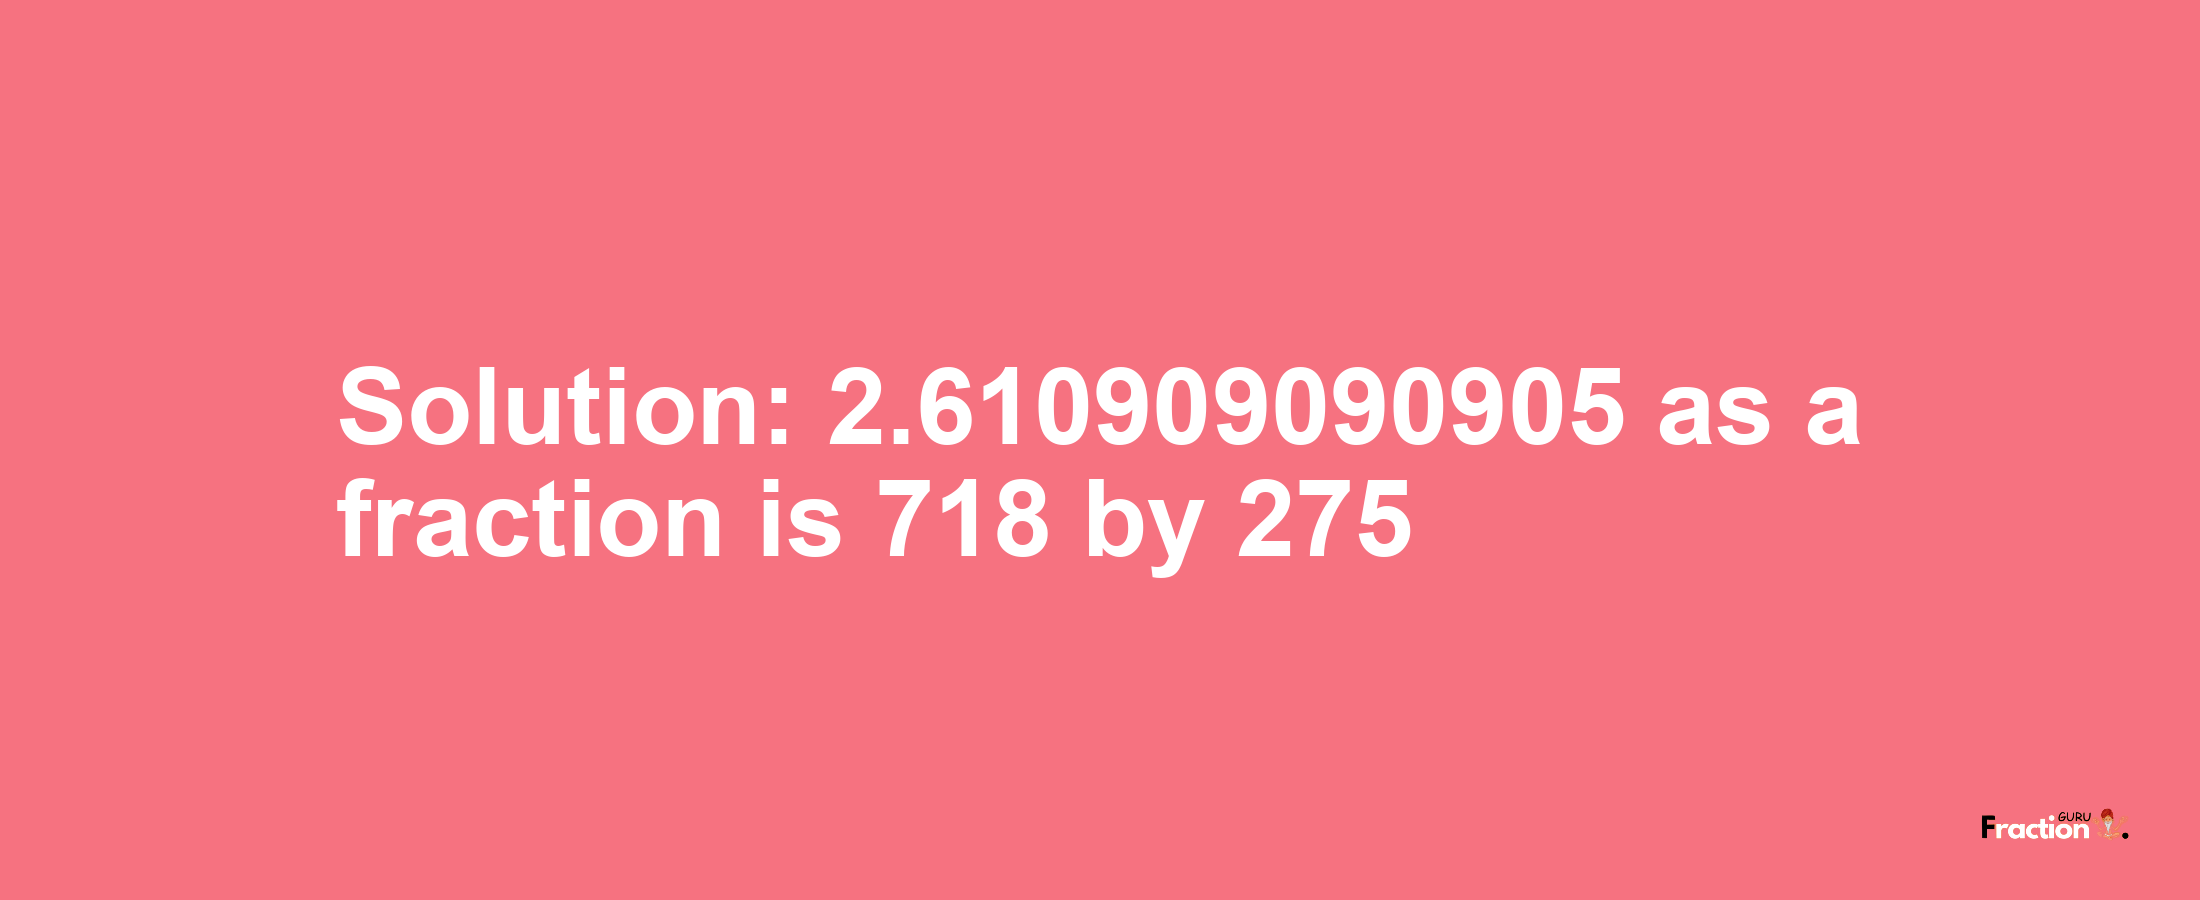 Solution:2.610909090905 as a fraction is 718/275